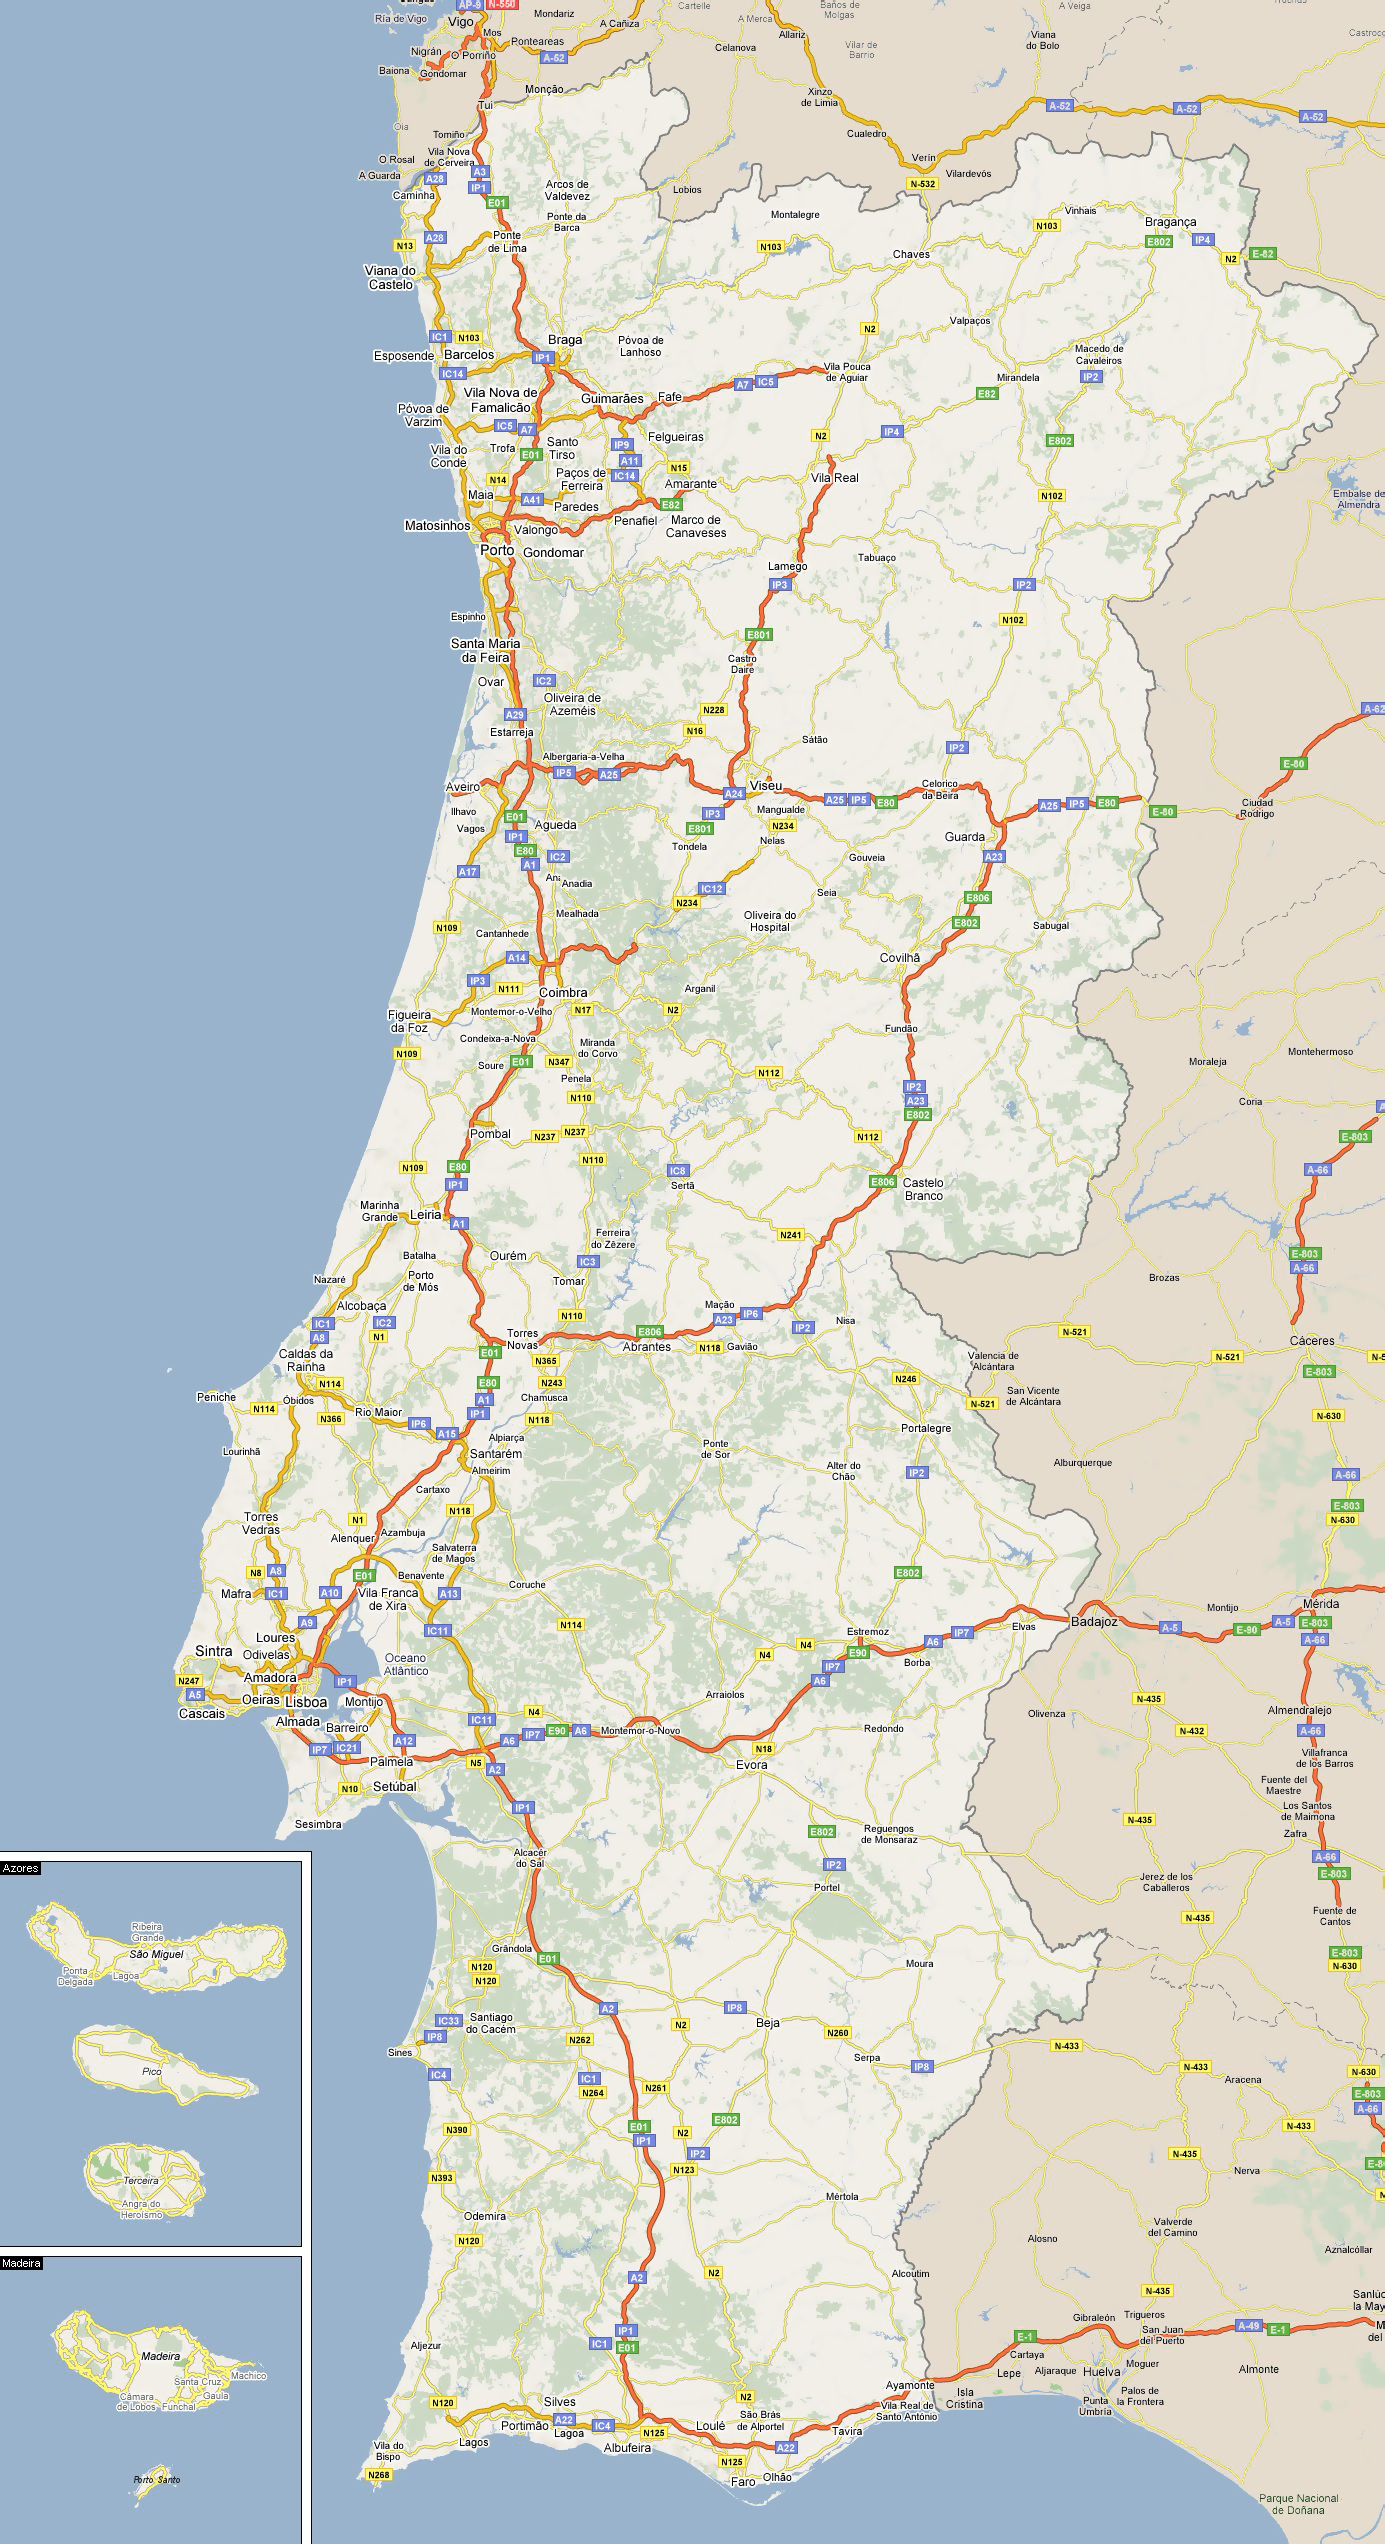 Detailed map of Portugal with roads and other marks, Portugal, Europe, Mapsland